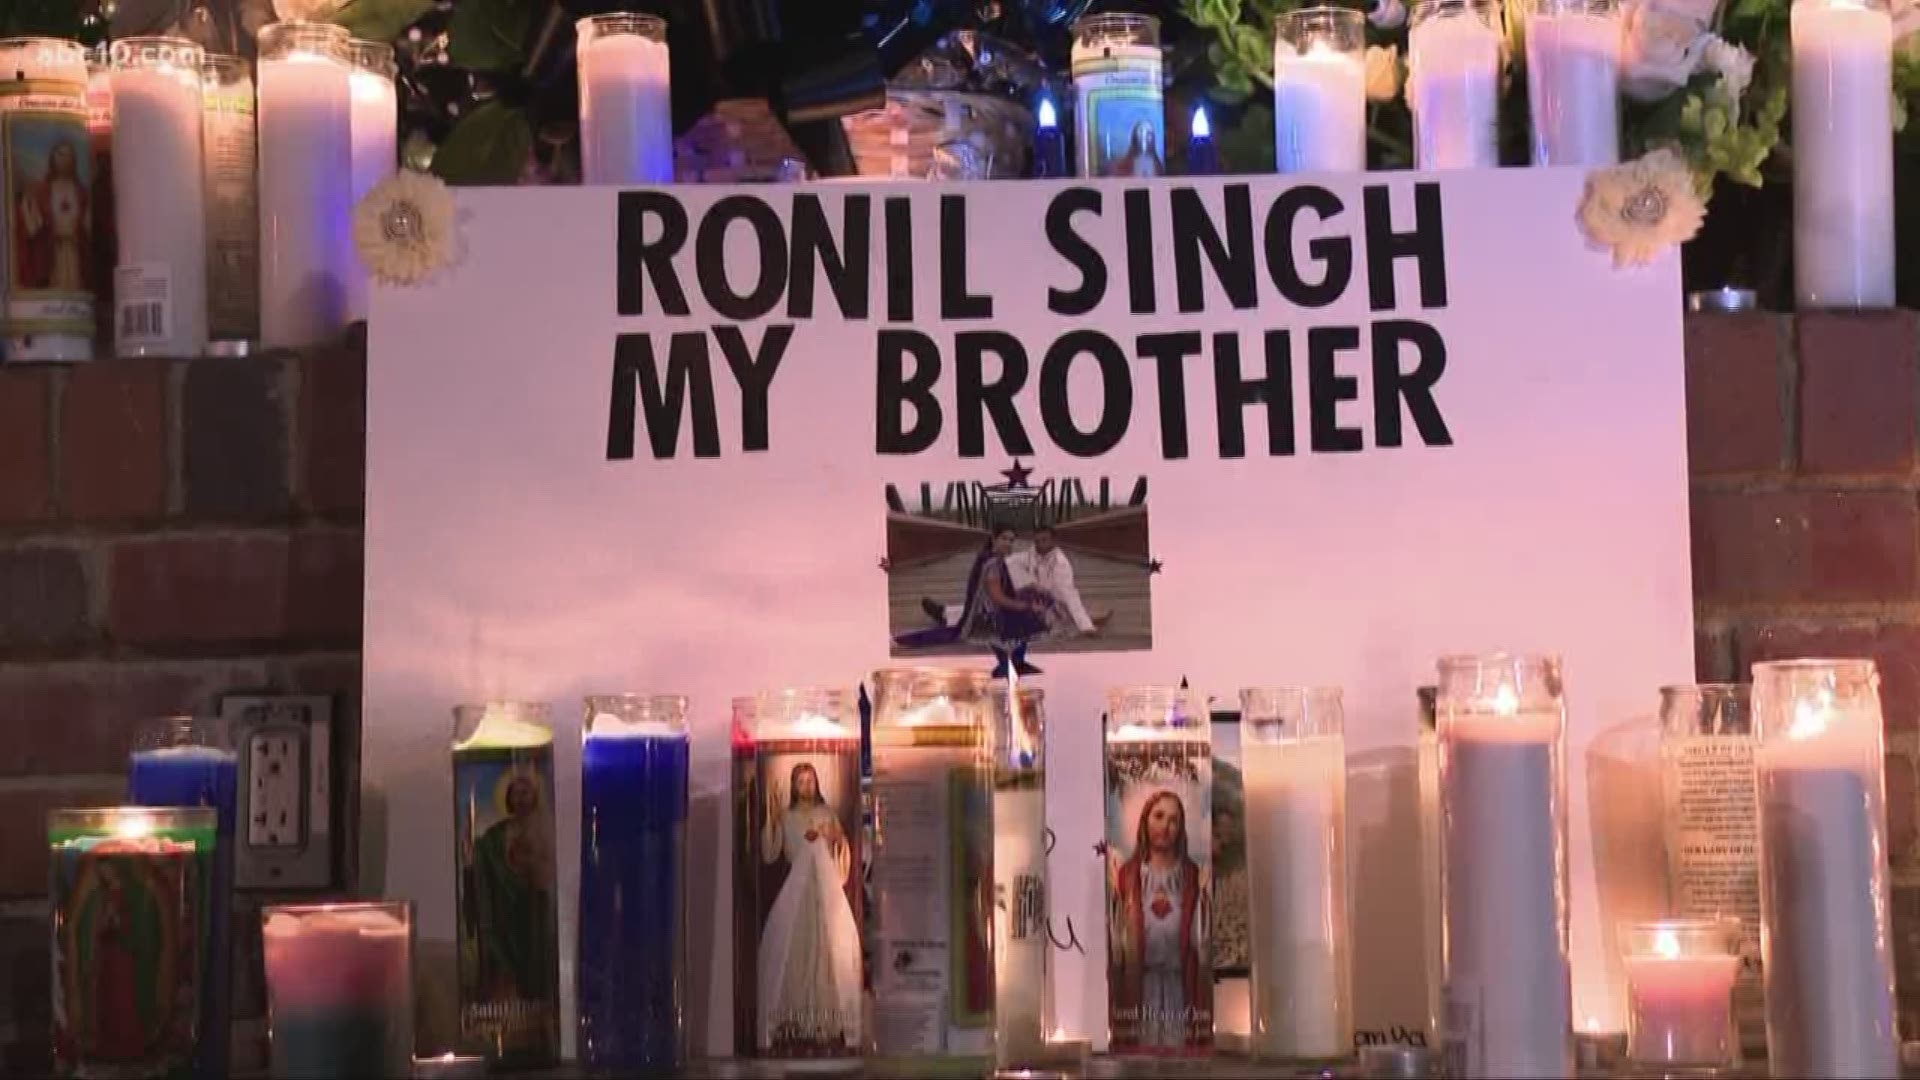 Surrounded in love and support, fallen Newman Police Cpl. Ronil Singh's wife, newborn son and family walked into the middle of the courtyard. His K9, Sam, led the way. There was a simple prayer for peace – “We ask for your comfort, your strength.” – before people chose to share how Singh touched their lives.